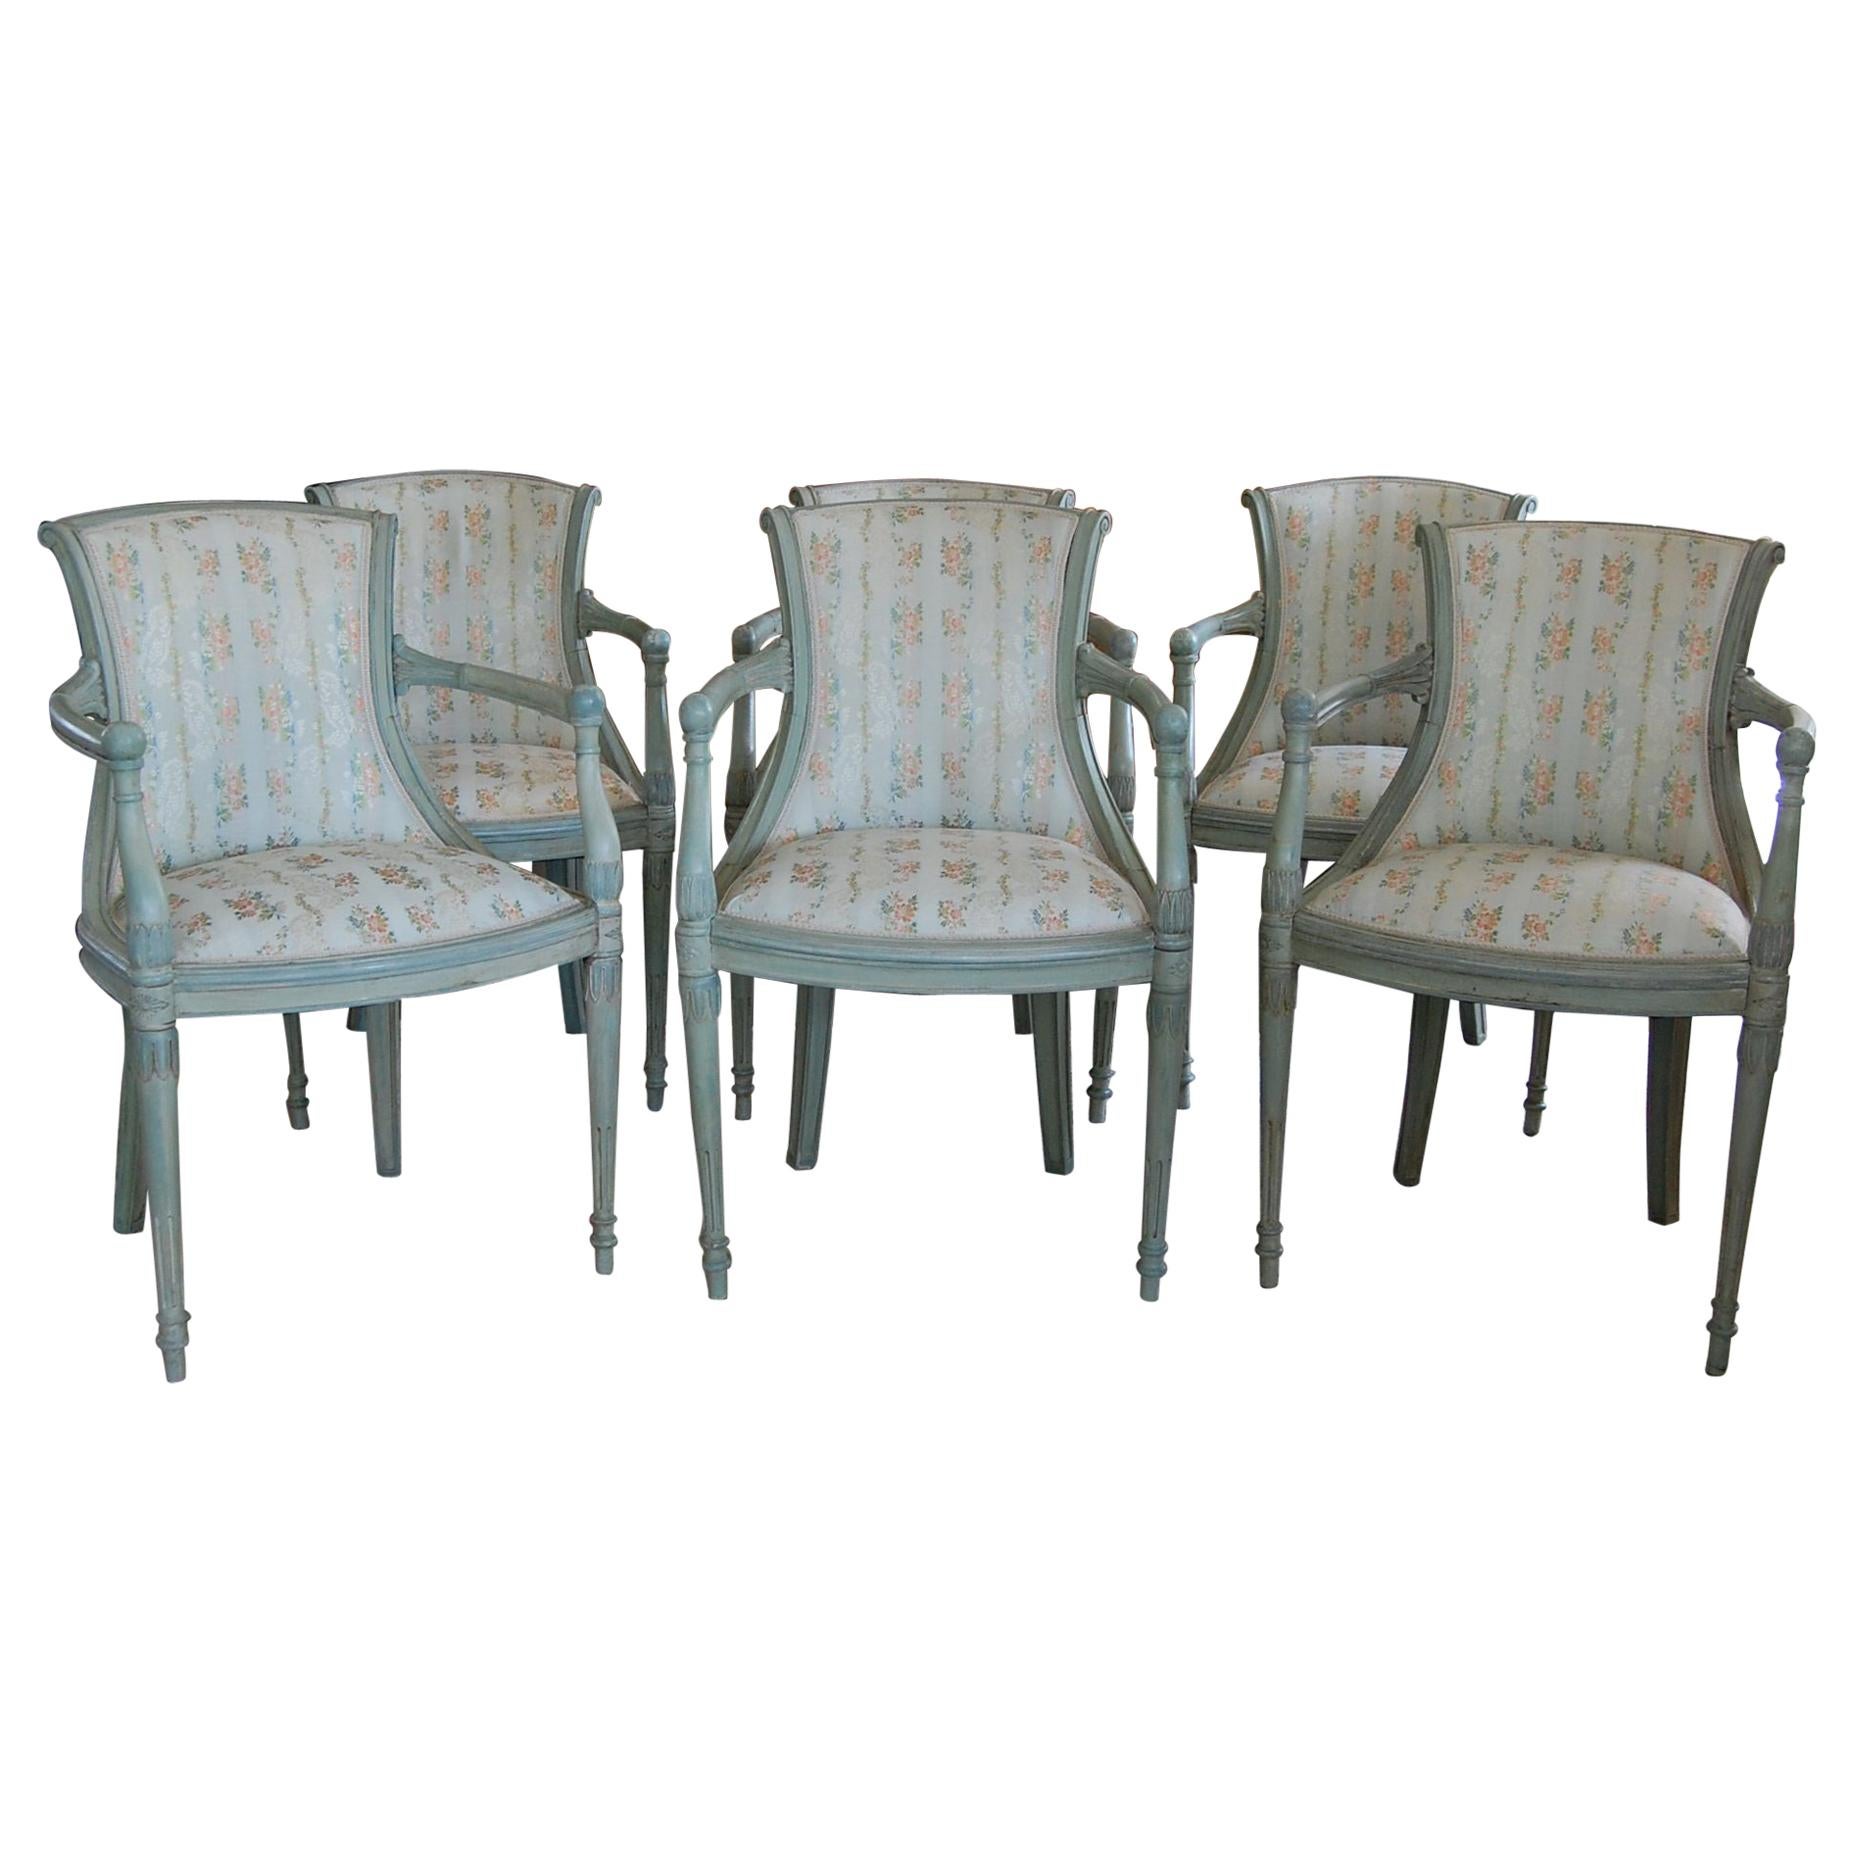 Set of Six Louis XVI Style Fauteuils in Green Paint, 19th Century For Sale